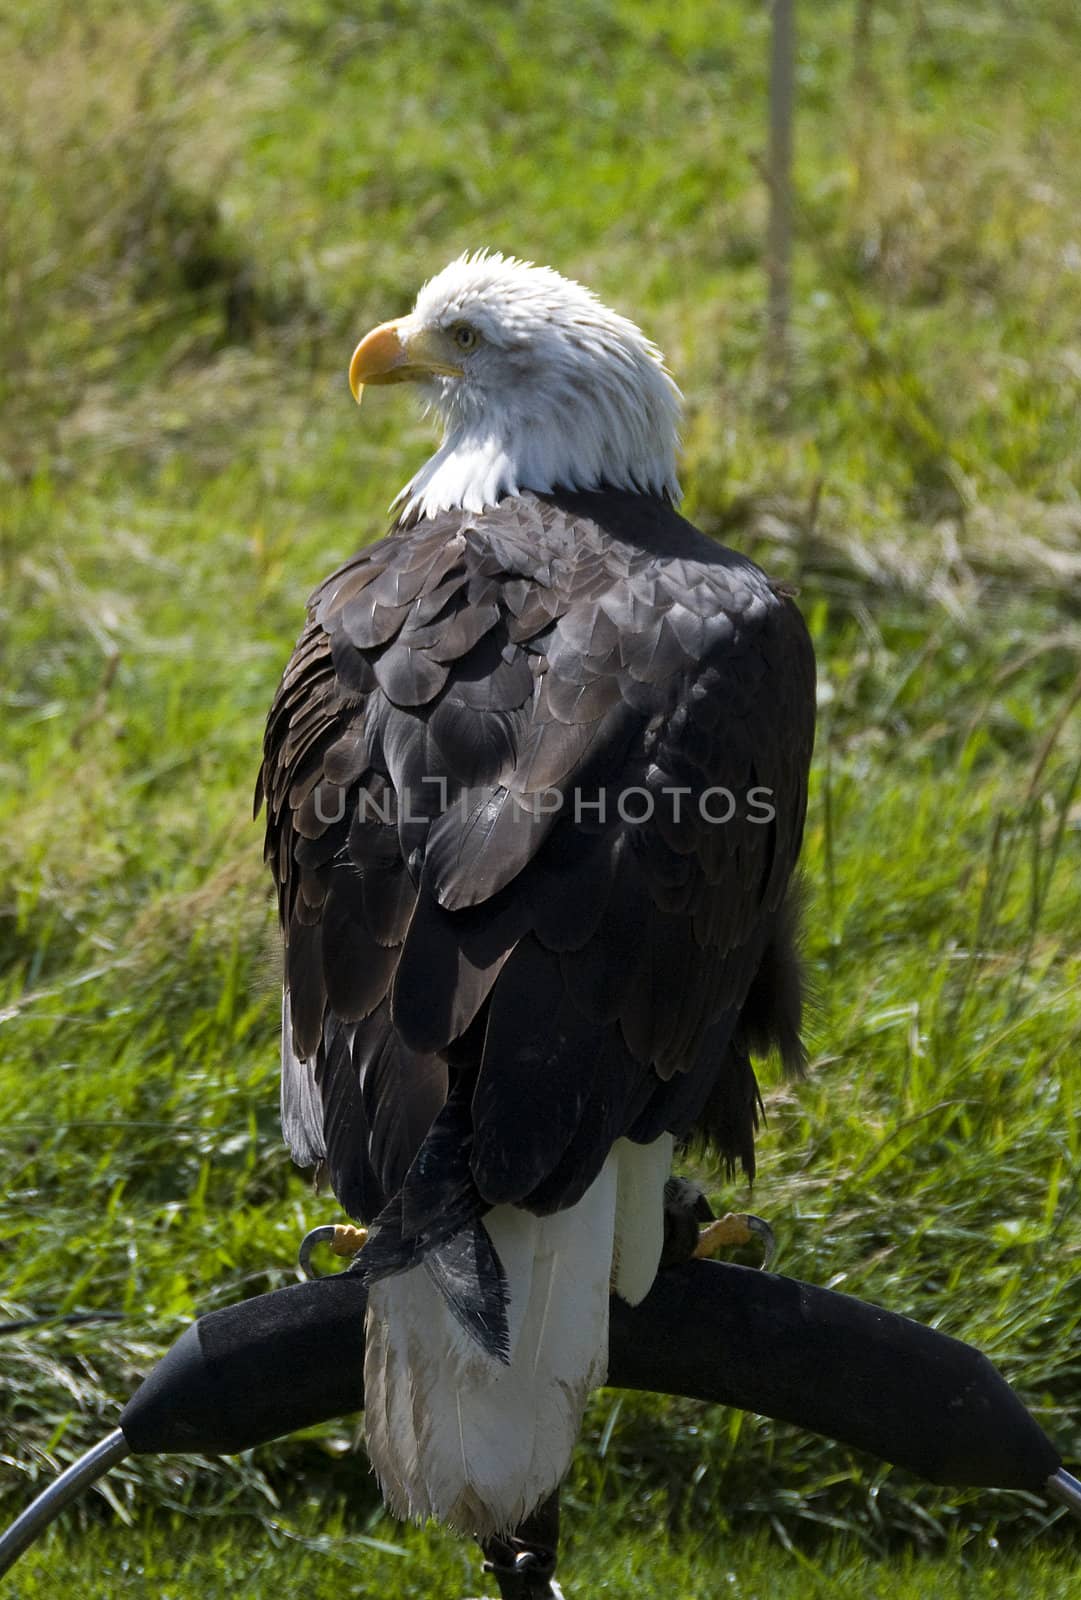 sea eagle on a bird show with blur background